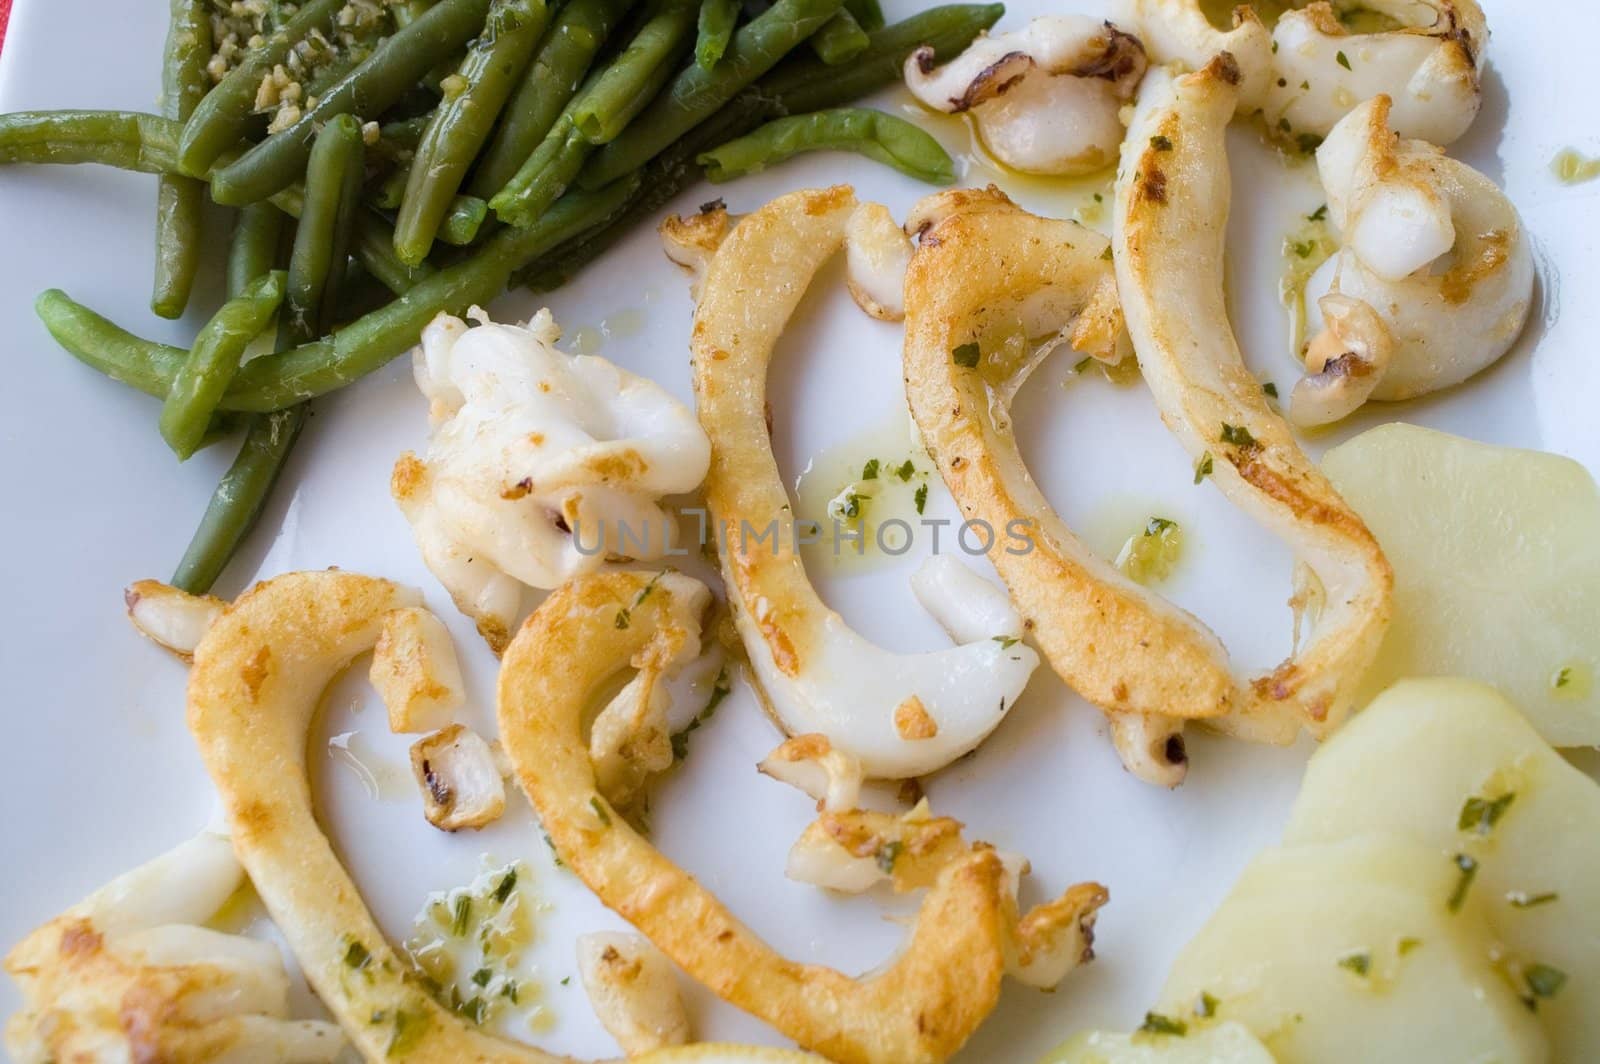 calamary with vegetables,plate for restaurant